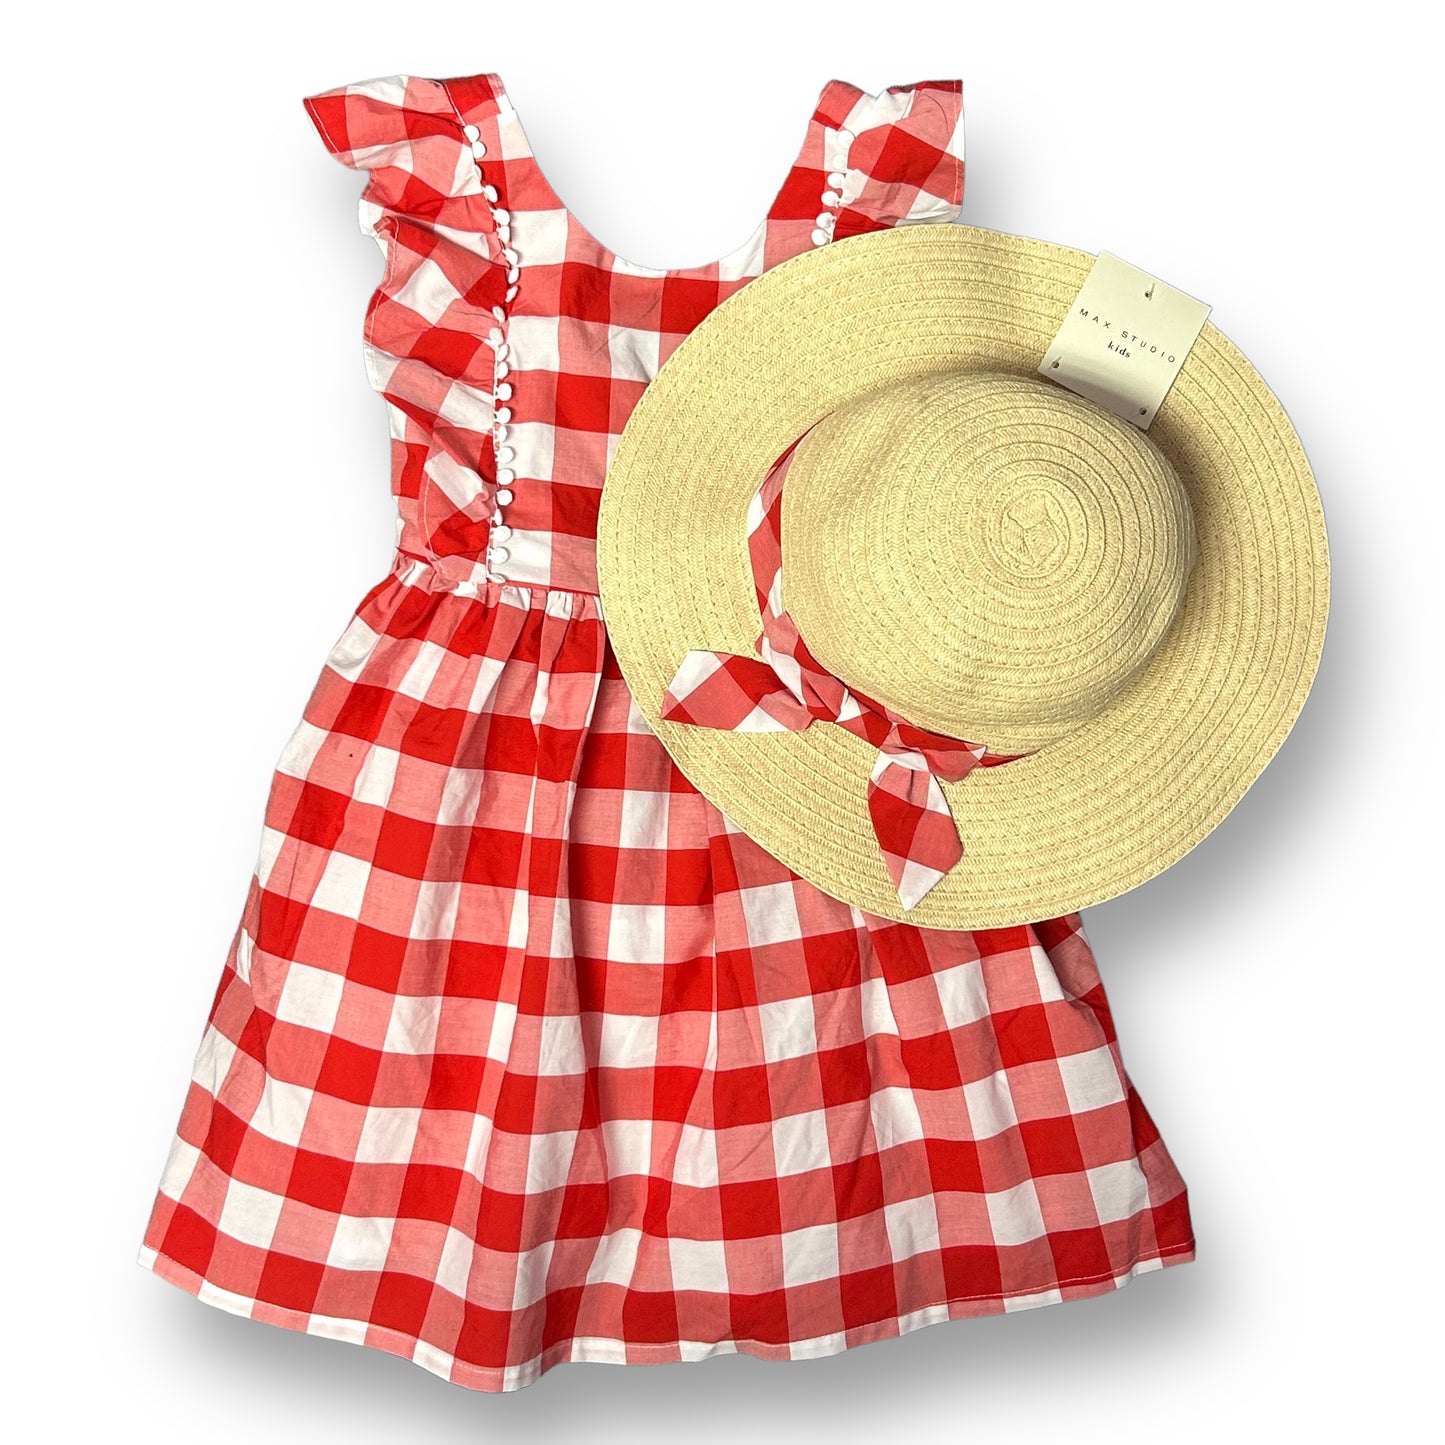 NEW! Girls Max Studio Size 4T Red & White Checkered Sleeveless Dress with Hat